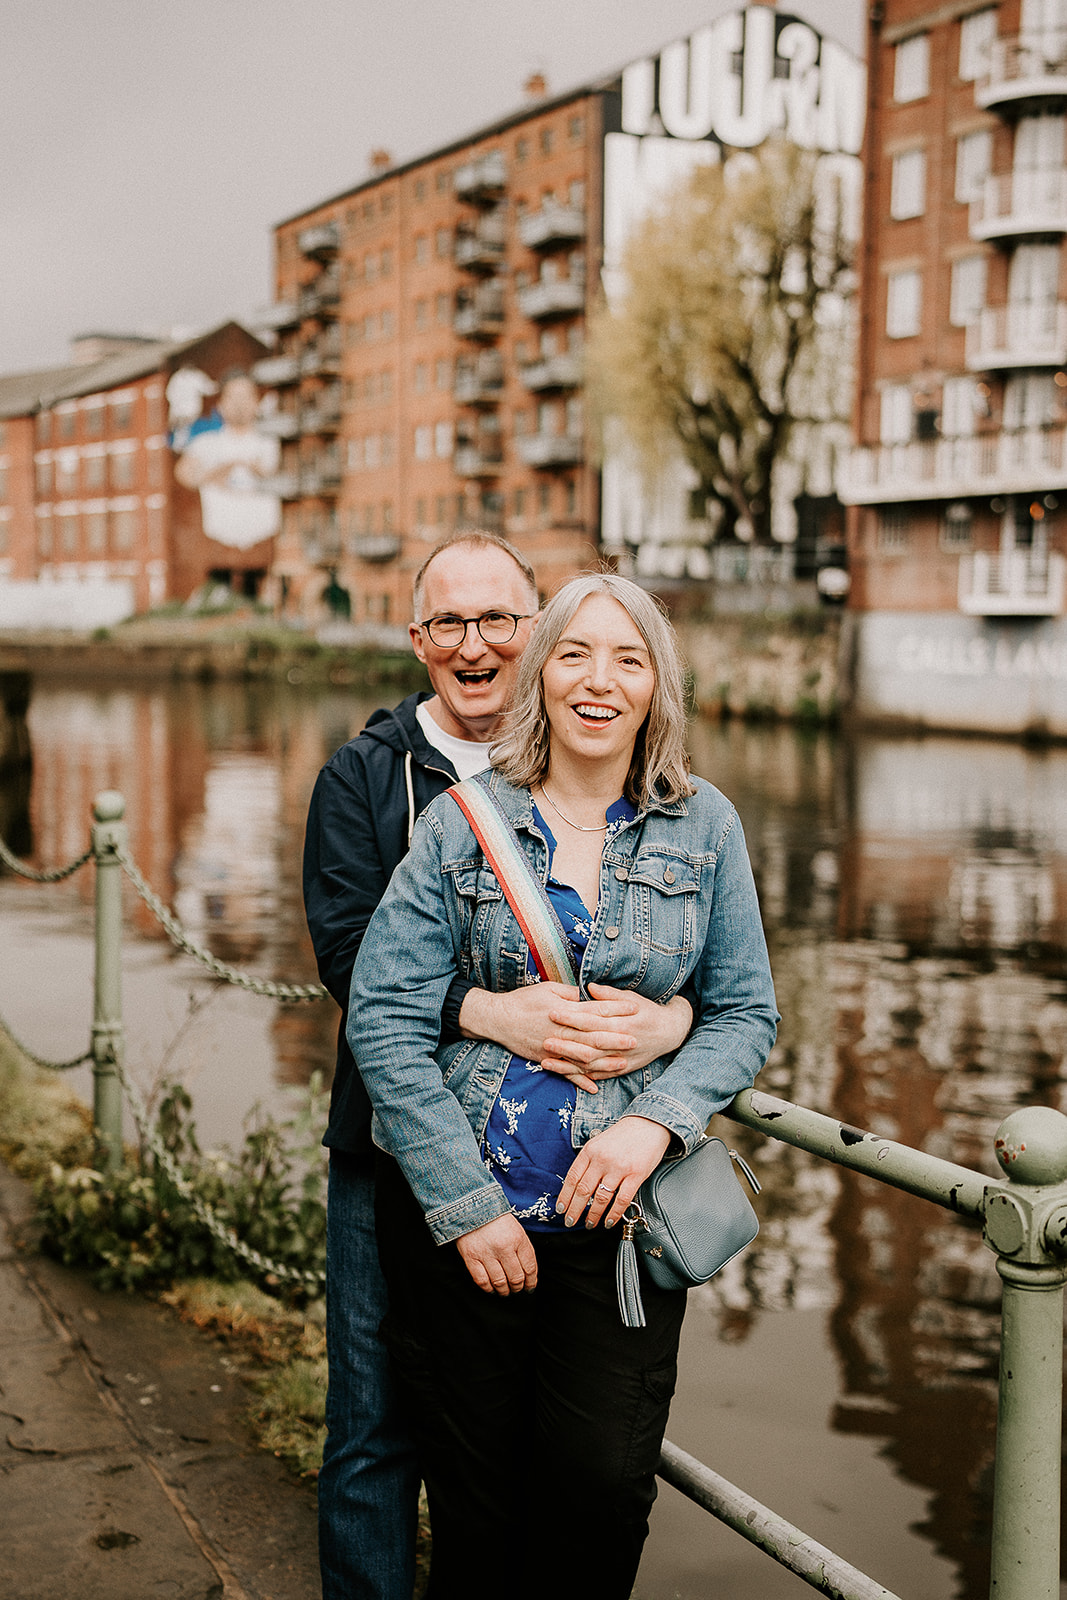 Fun & Colourful Engagement Shoot in Leeds